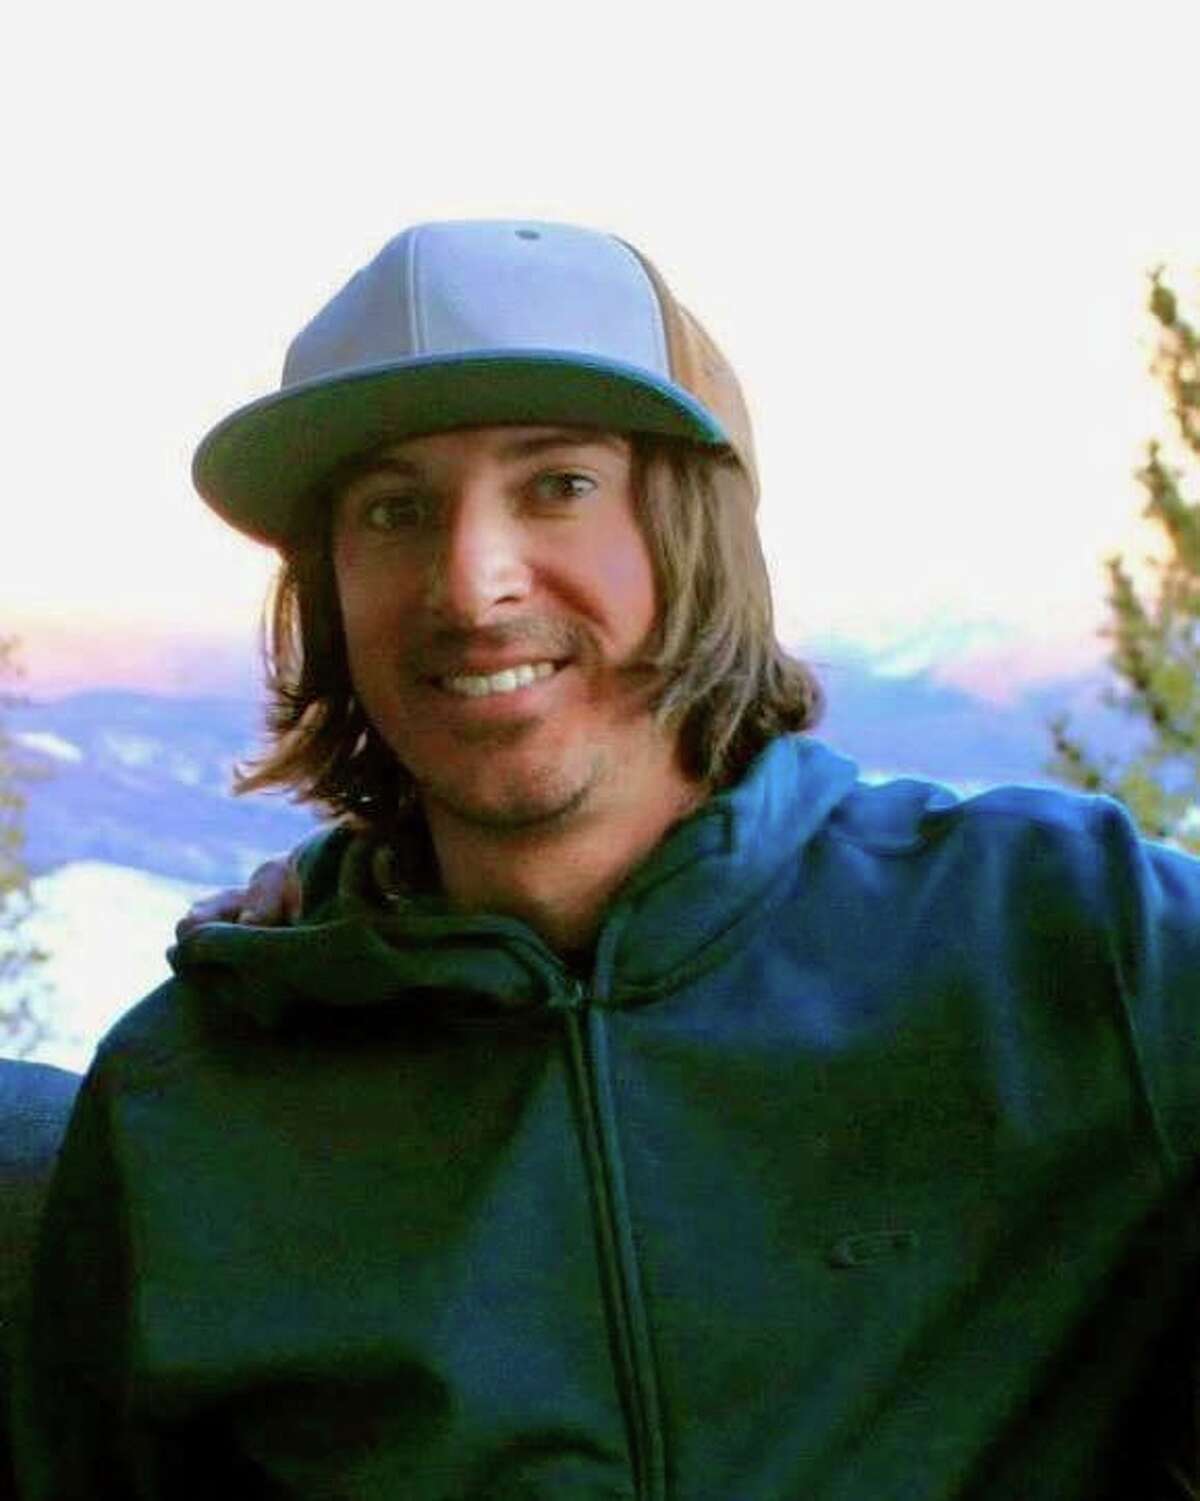 Rory Angelotta, who went missing at Northstar resort.